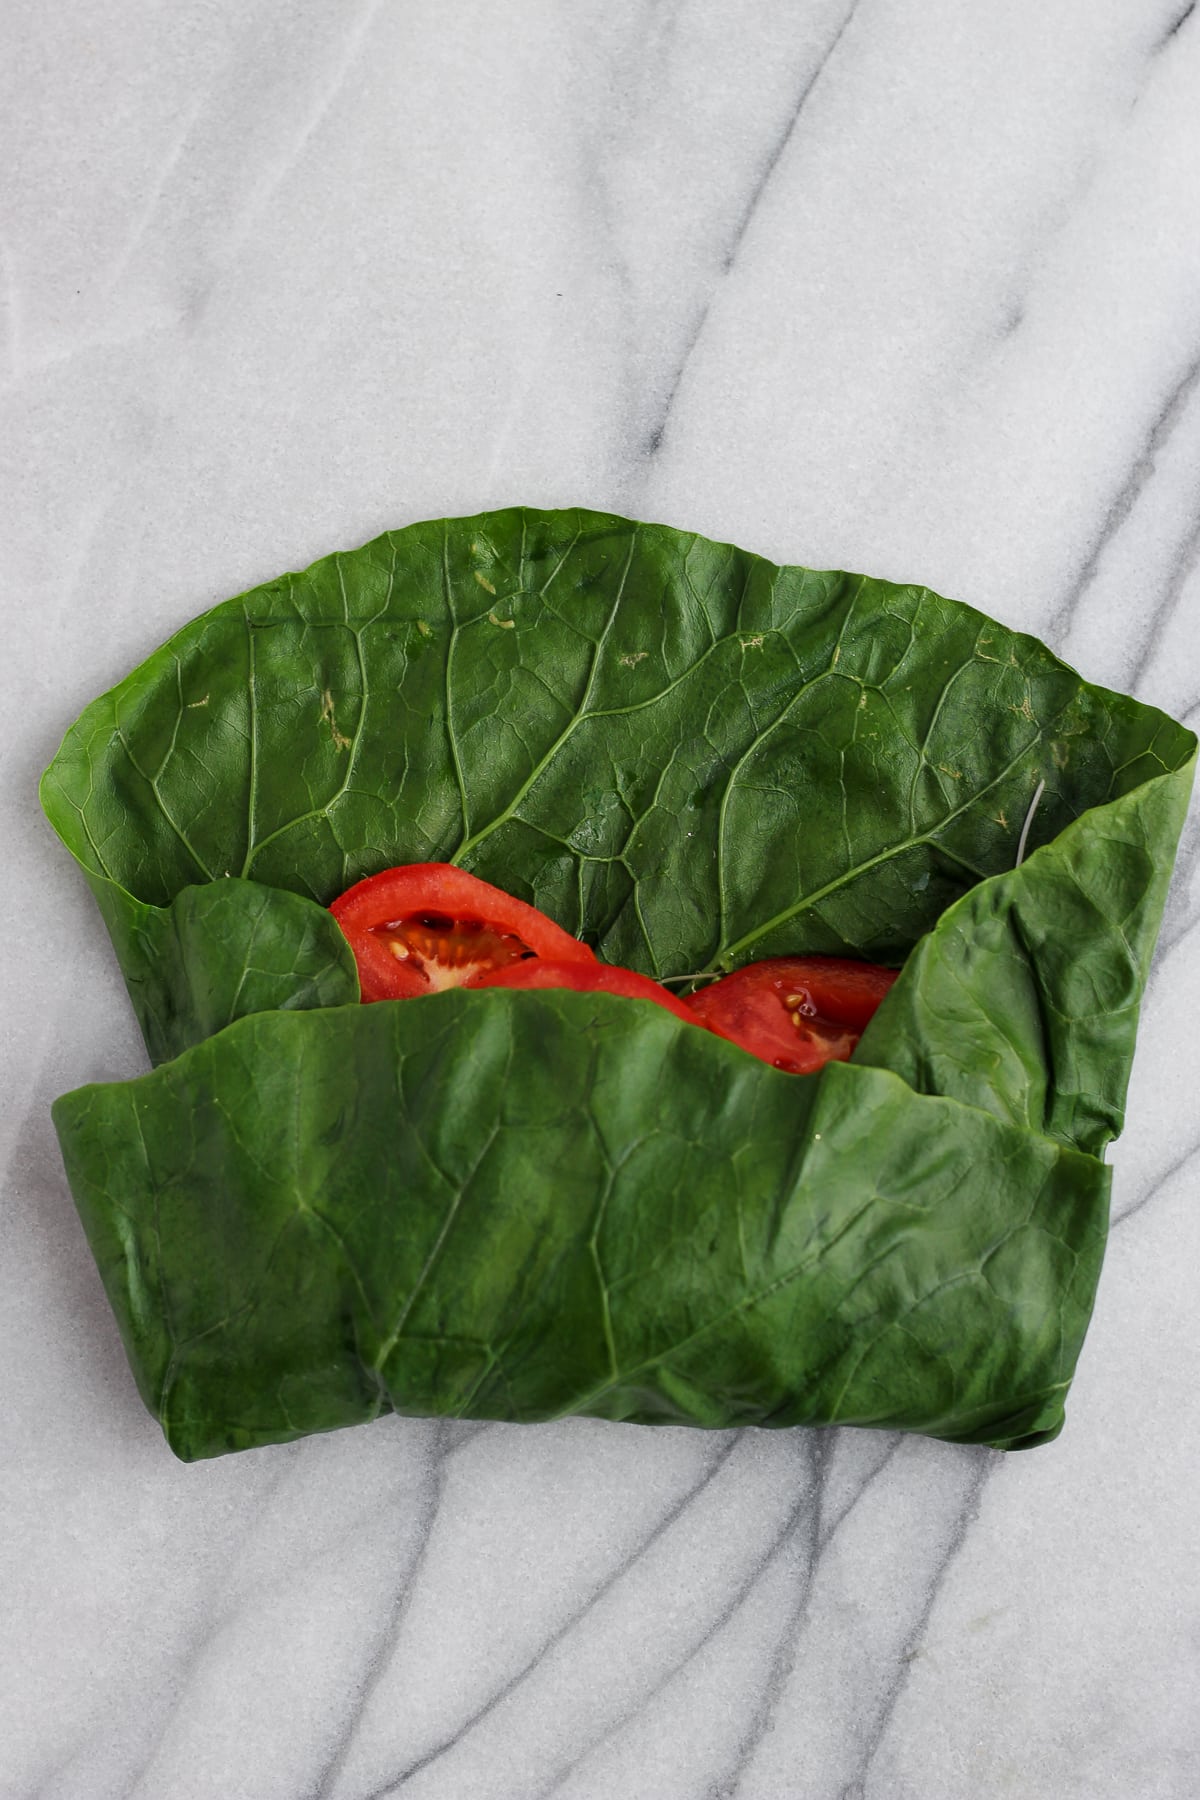 One side of the collard leaf folded over the filling ingredients.